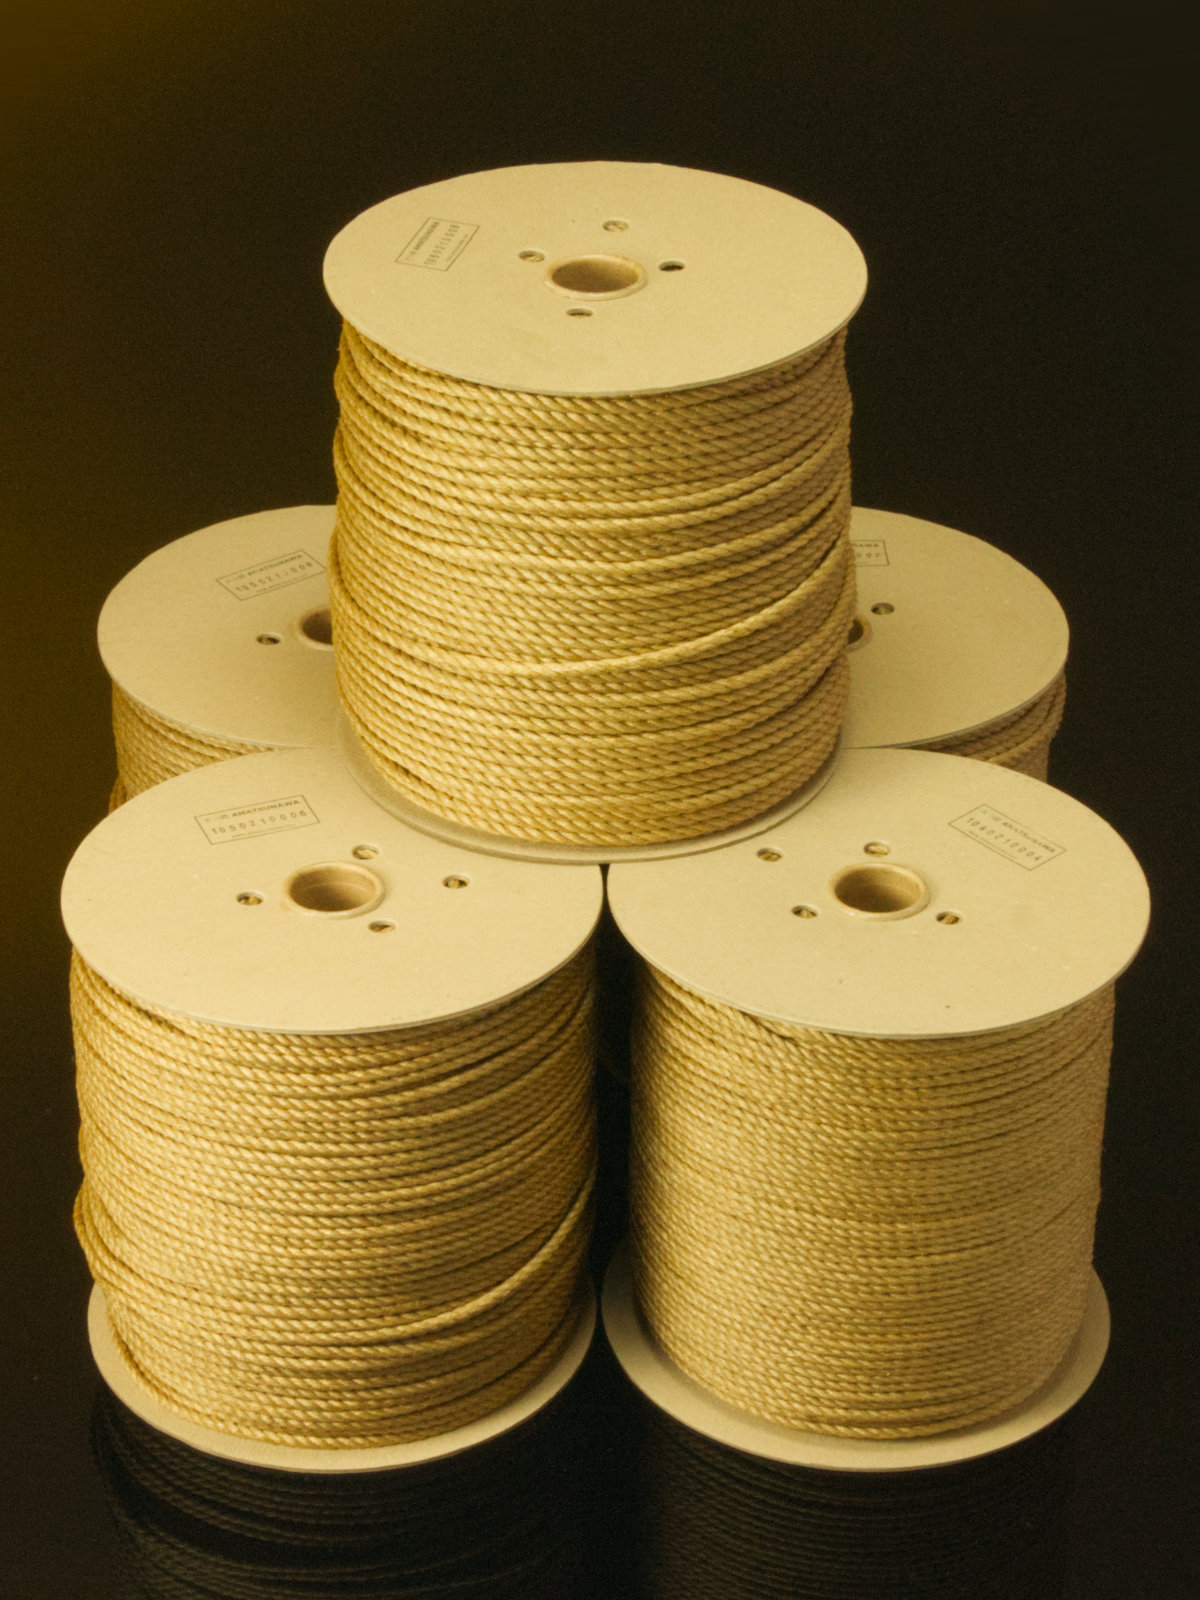 ∅ 5.5mm JOUYOKU MAXI-ROLL, ~6kg, 330m, ready-for-use Japanese-made jute rope, JBO-free